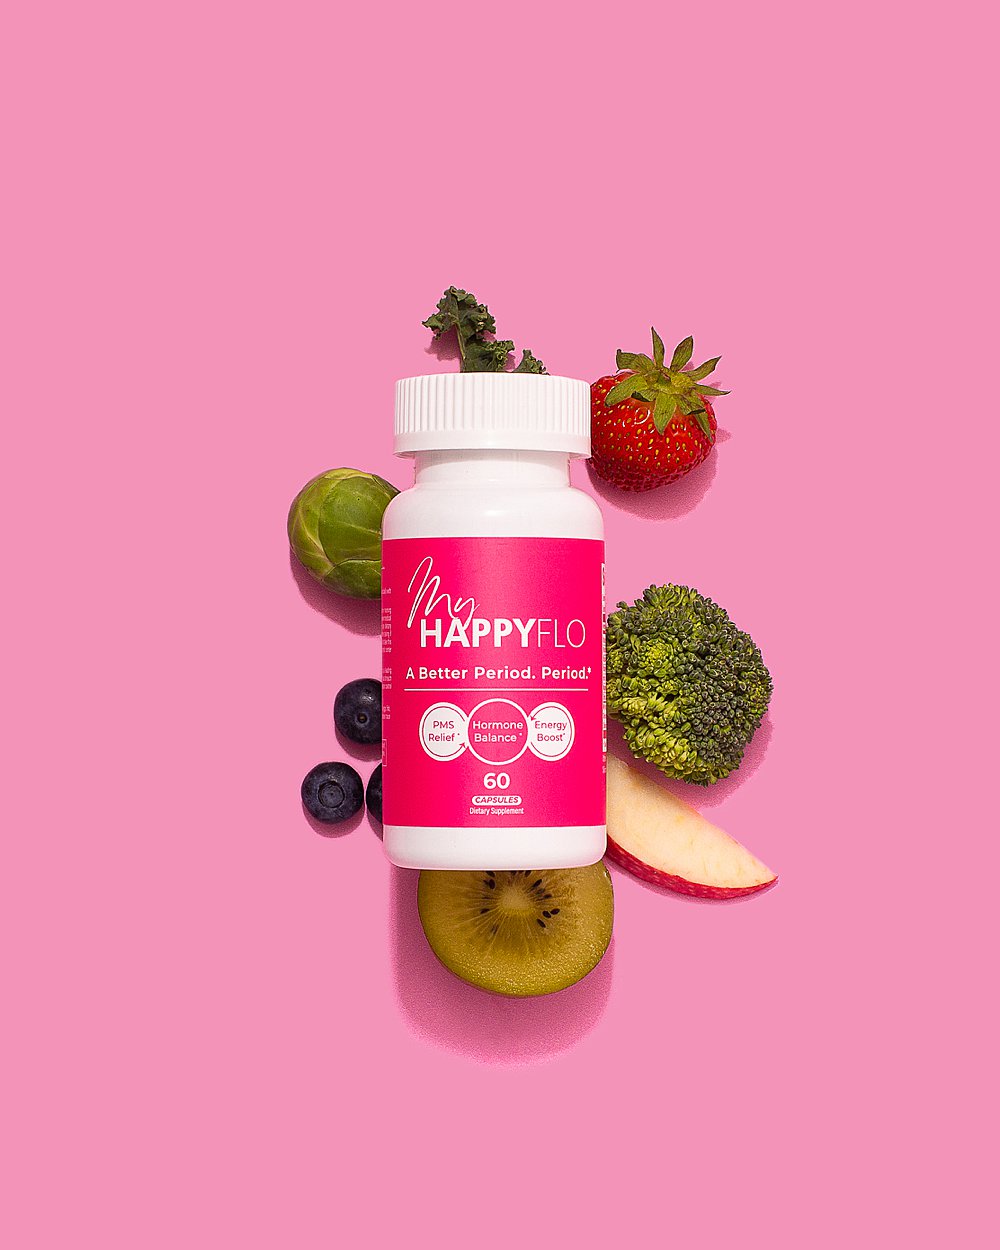 Colourful fun stills content creation for My Happy Flo period vitamins. Styled womens health product stills photography by HIYA MARIANNE.